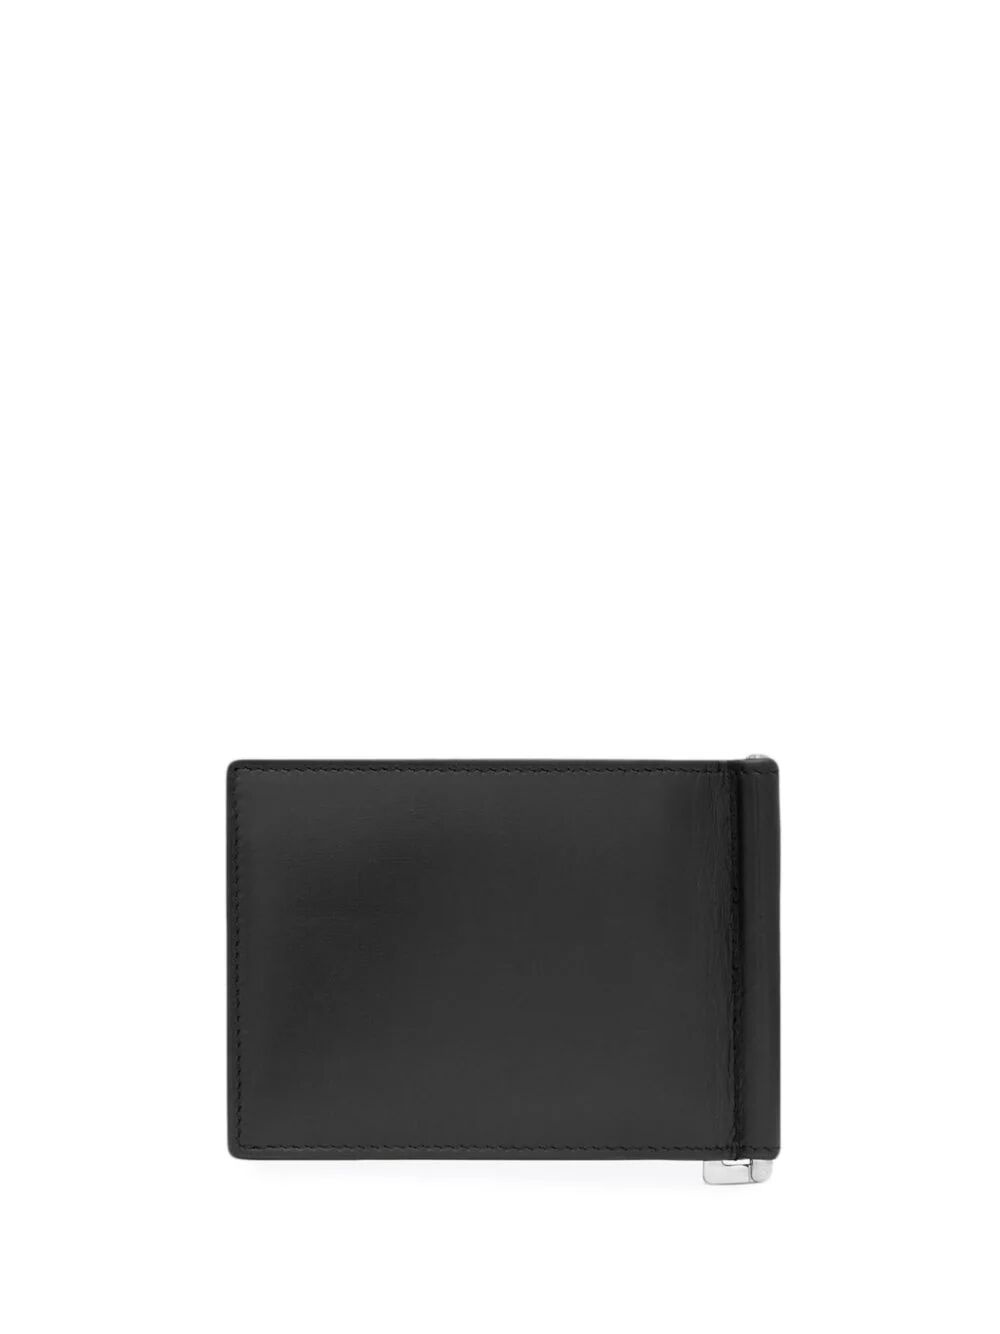 Wallet with cash holder in black leather - 2